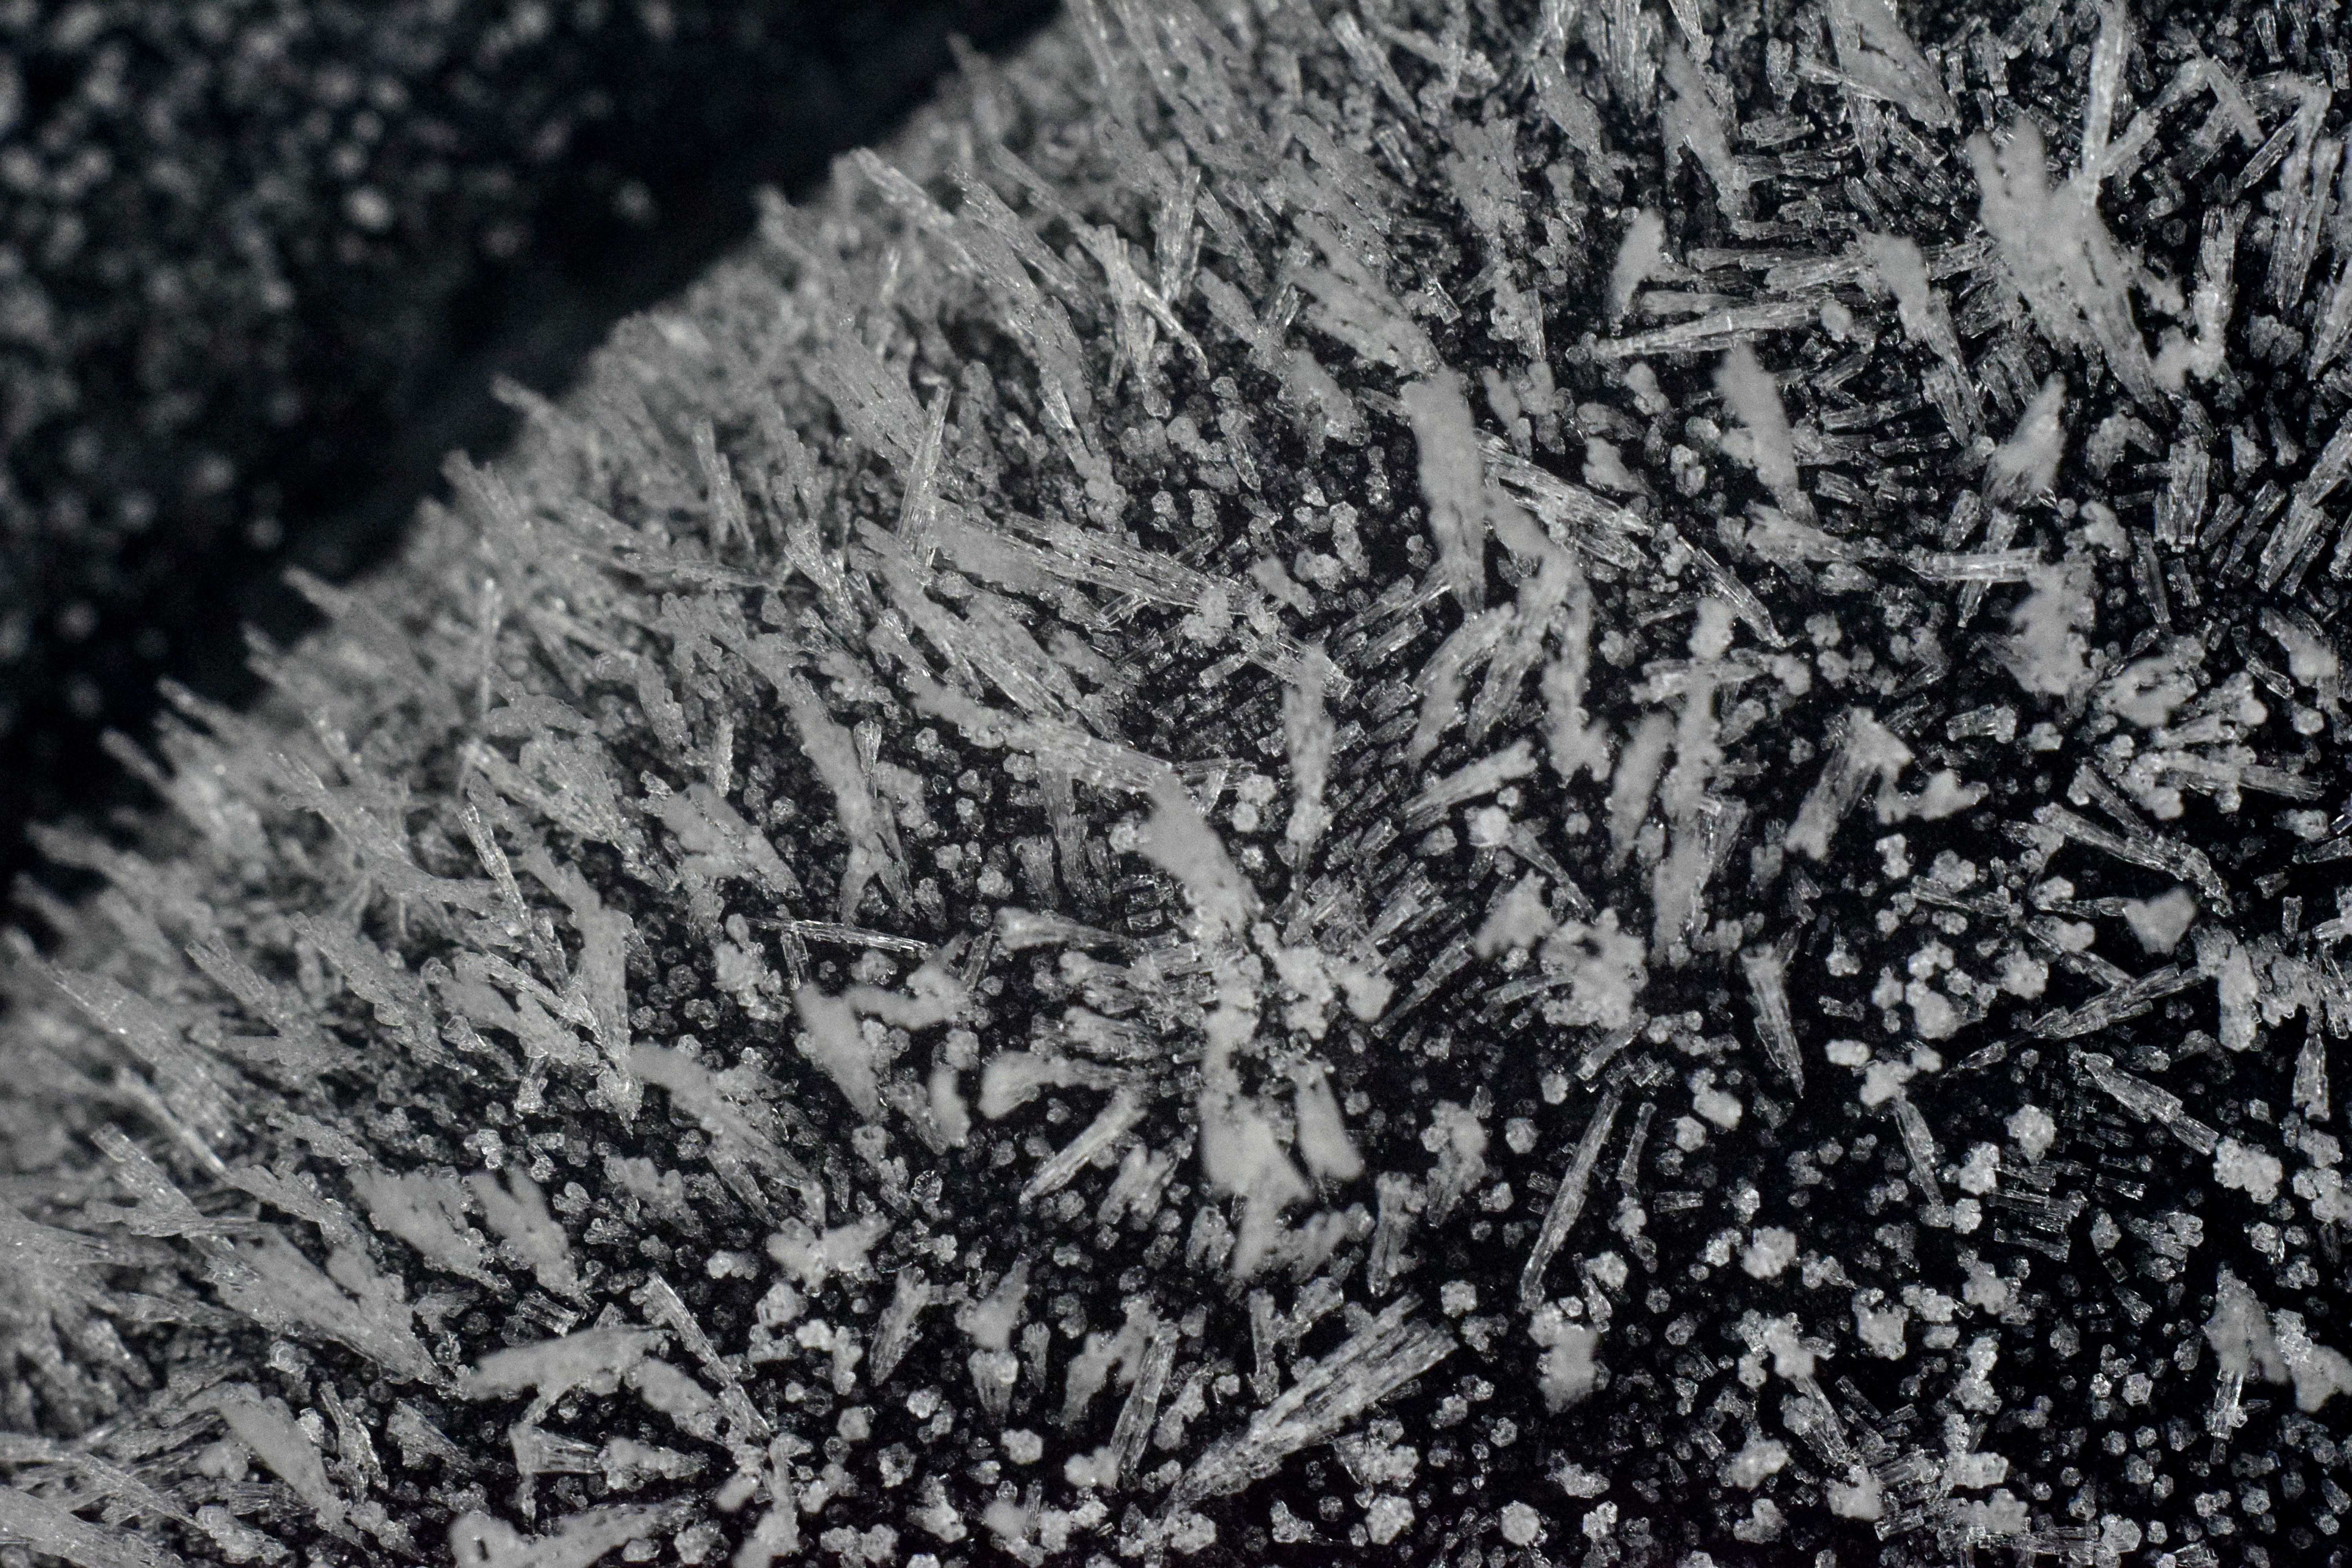 Ice spikes formed during the freezing of a thin water film.
